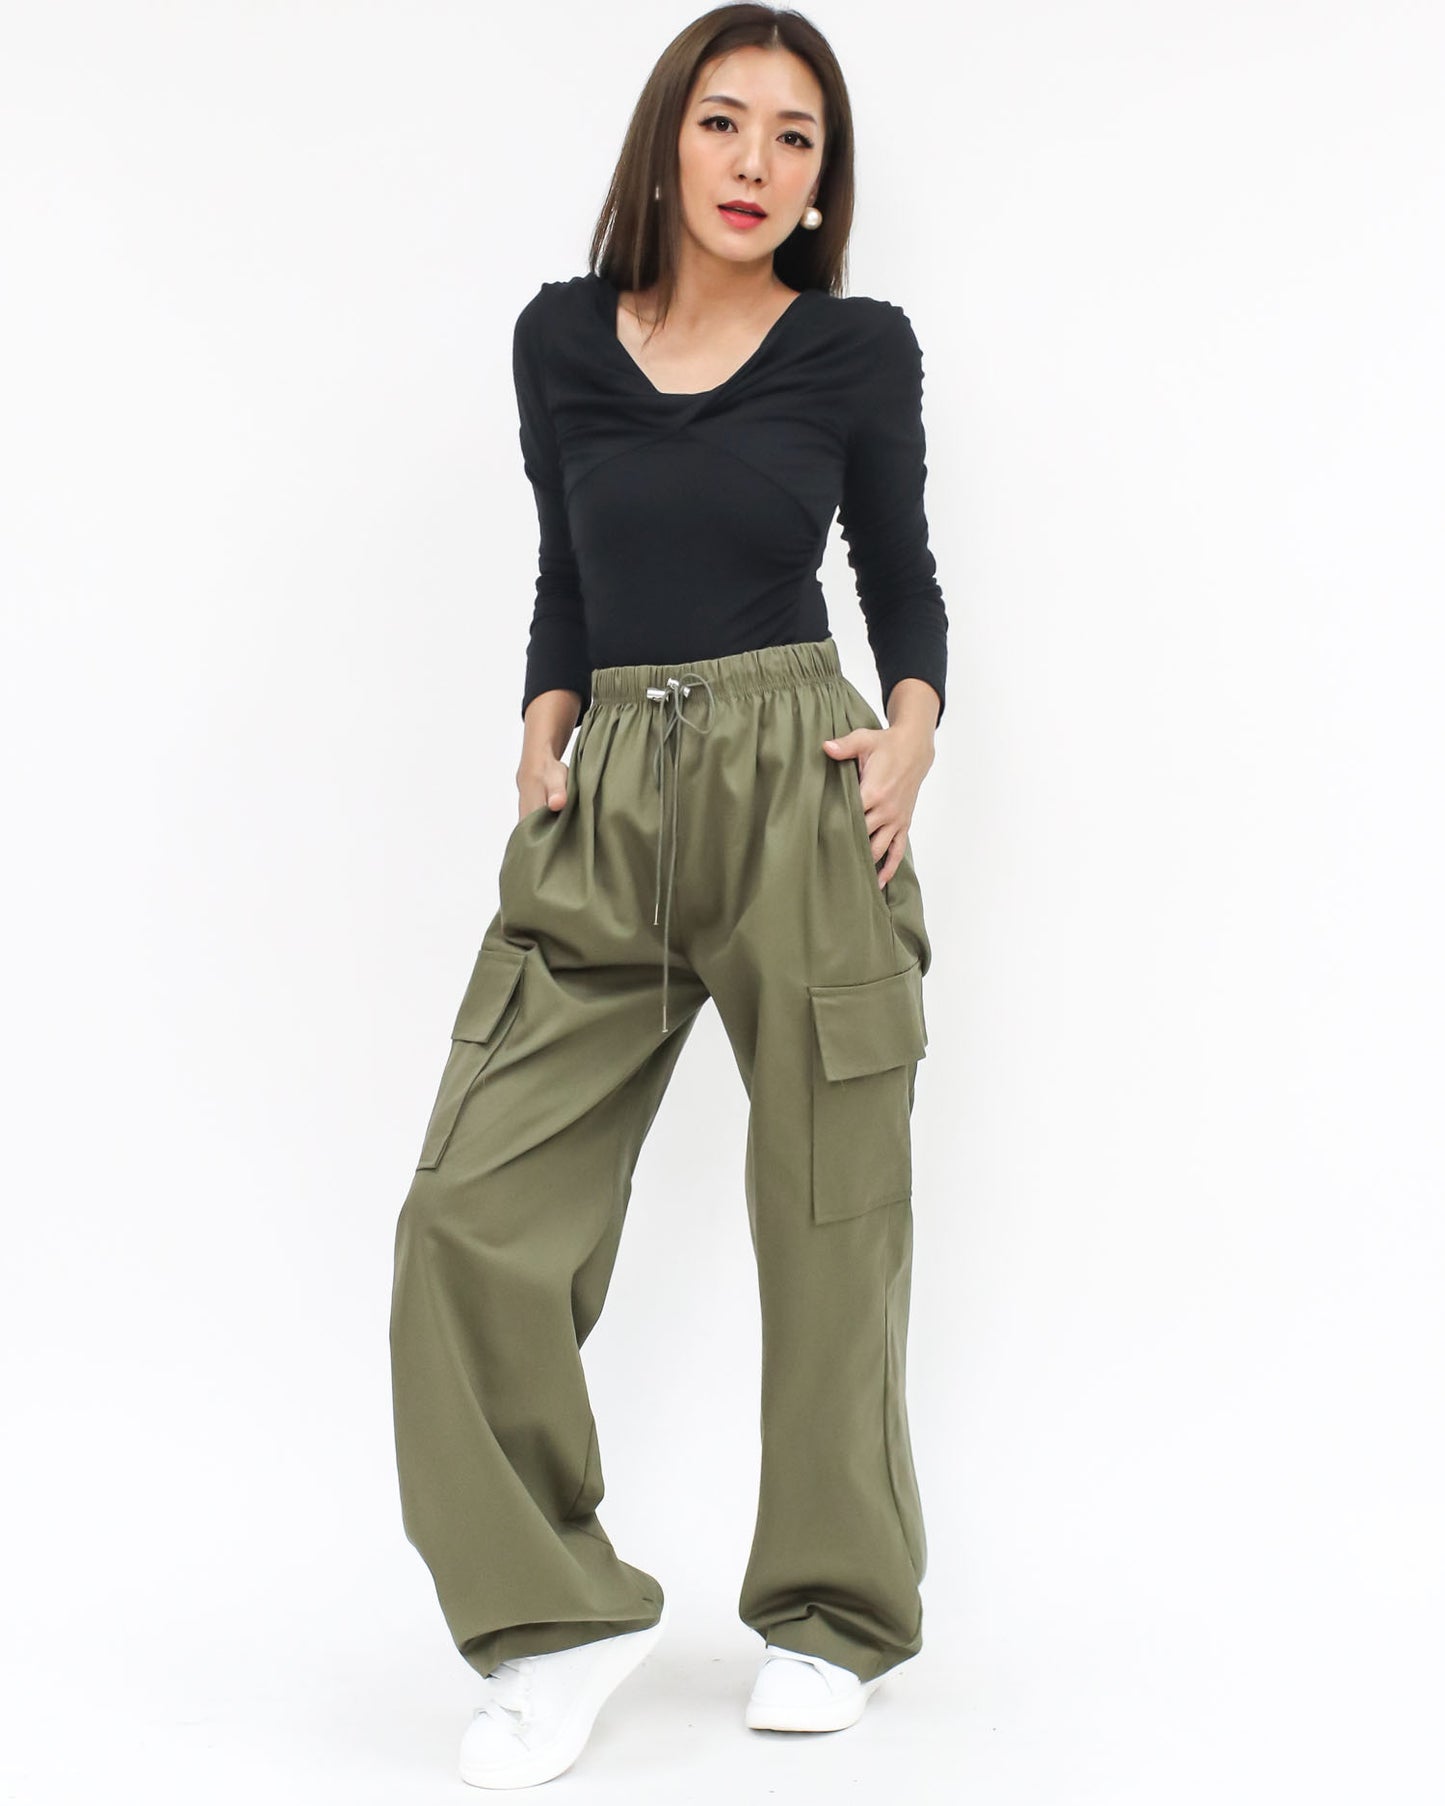 green pockets sides straight legs cotton pants *pre-order*